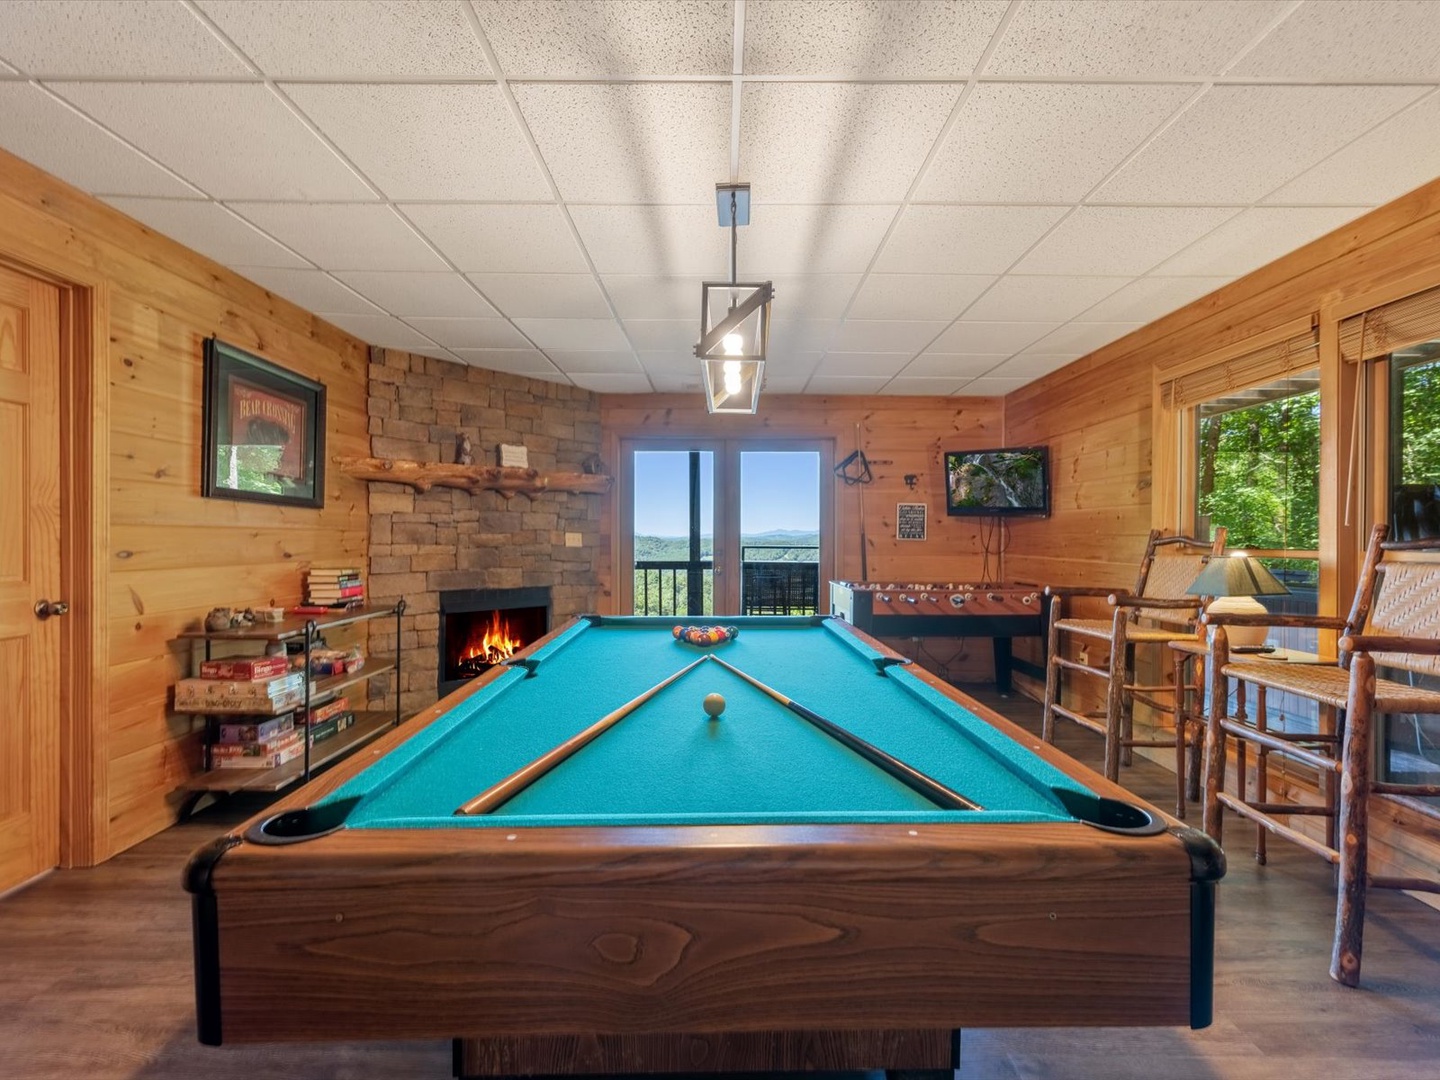 Bear Necessities- Lower level game room with pool table